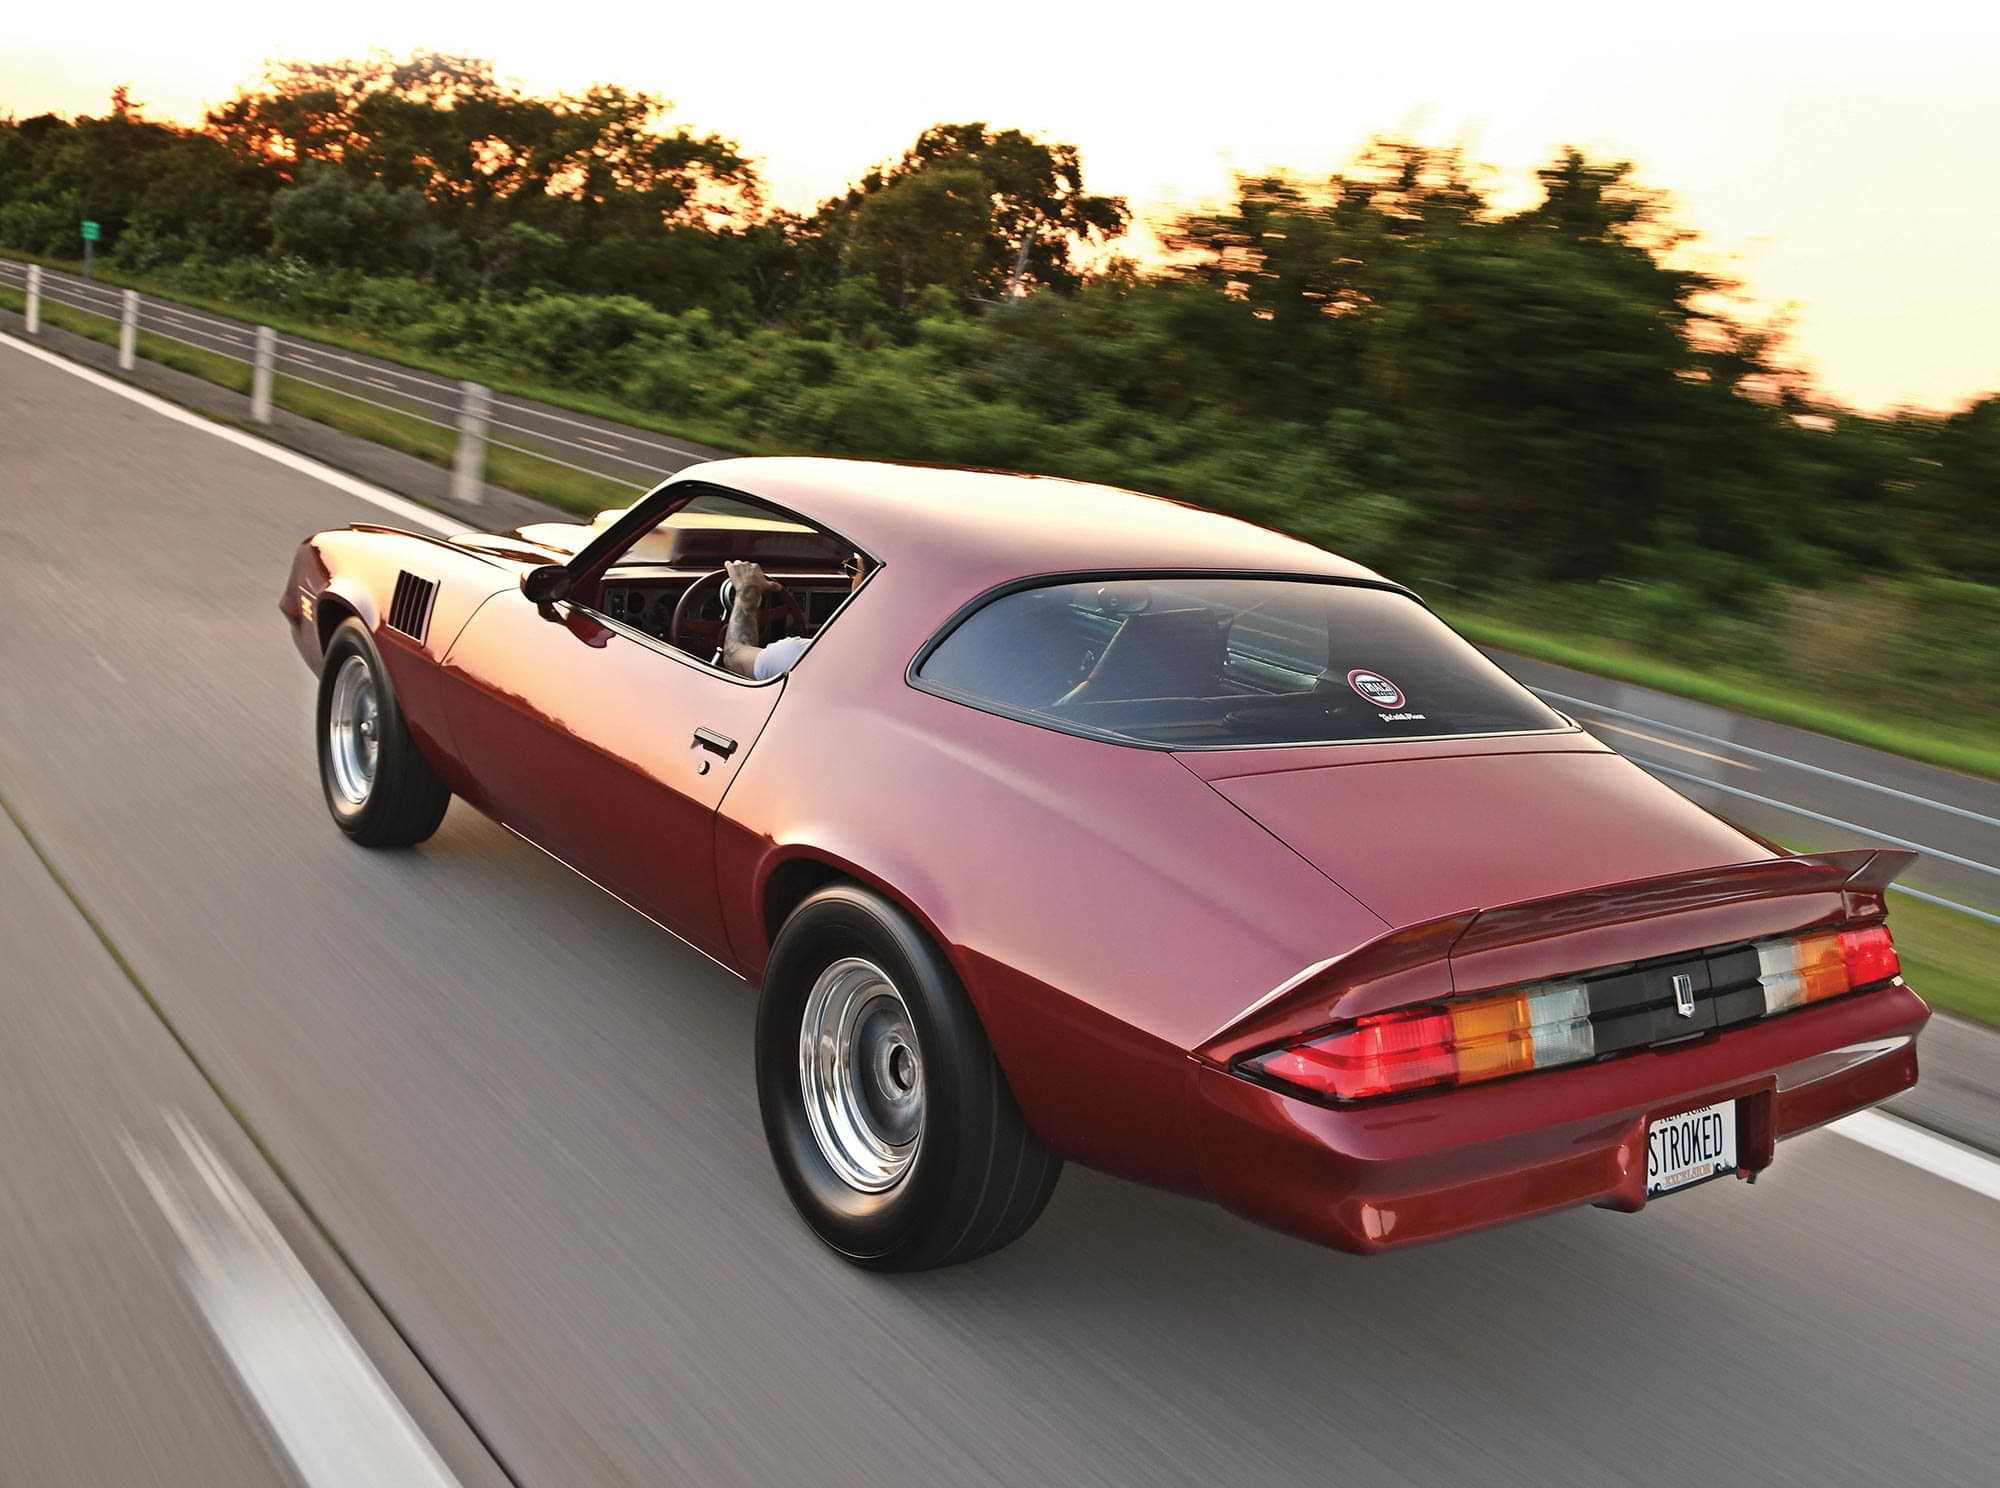 angled 3/4ths rear view of the the Flame Red ’79 Camaro Berlinetta riding up a highway